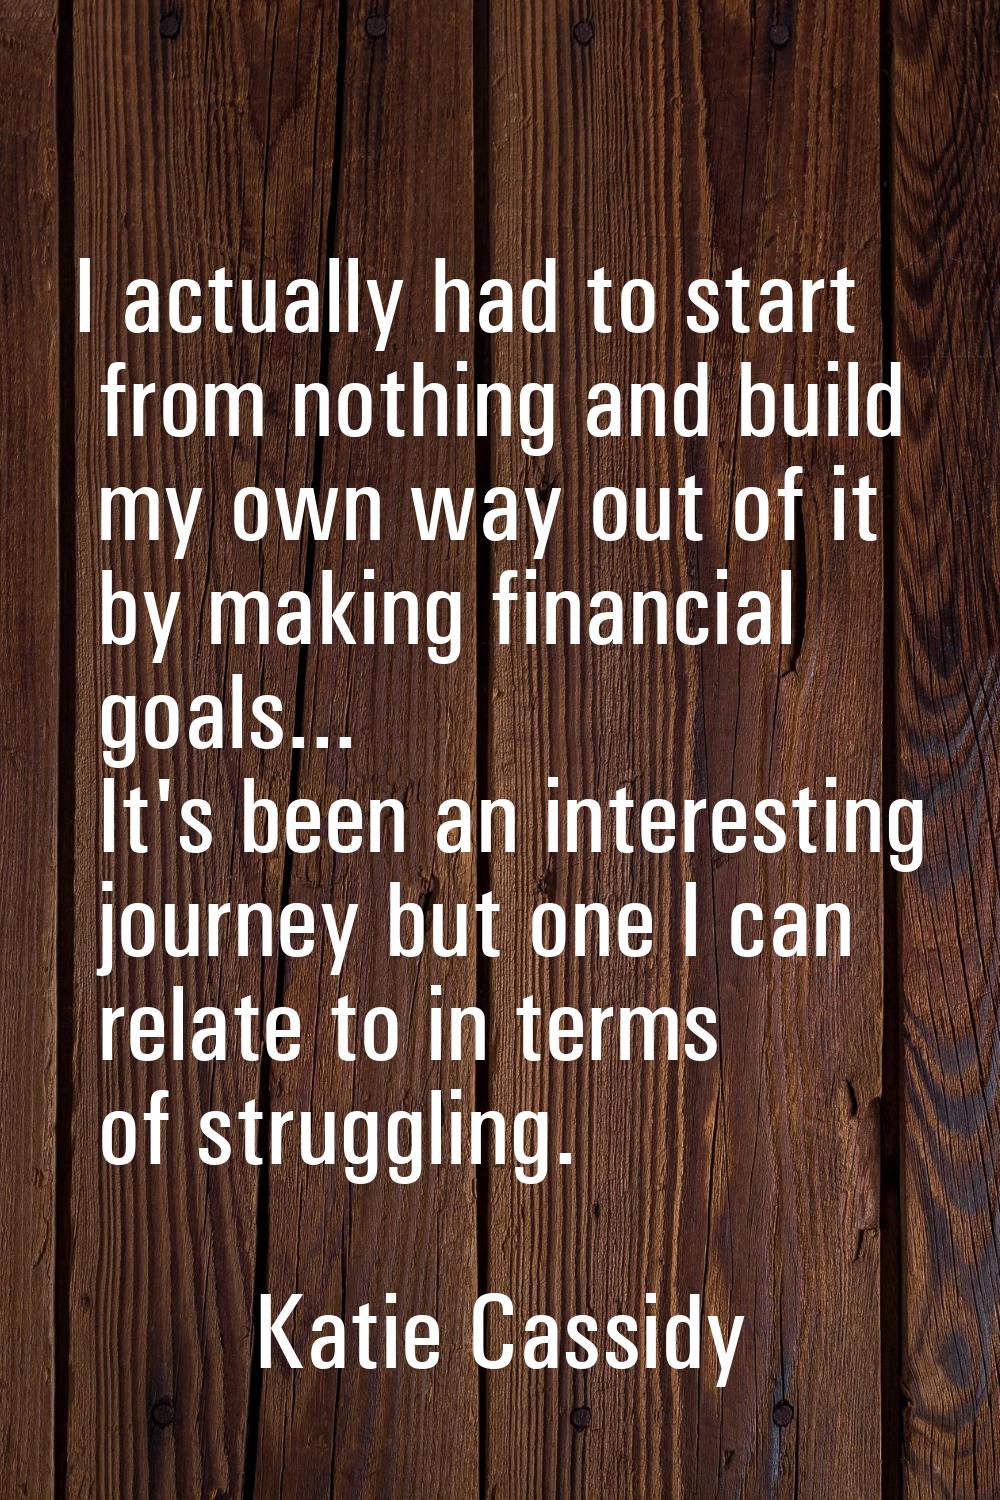 I actually had to start from nothing and build my own way out of it by making financial goals... It